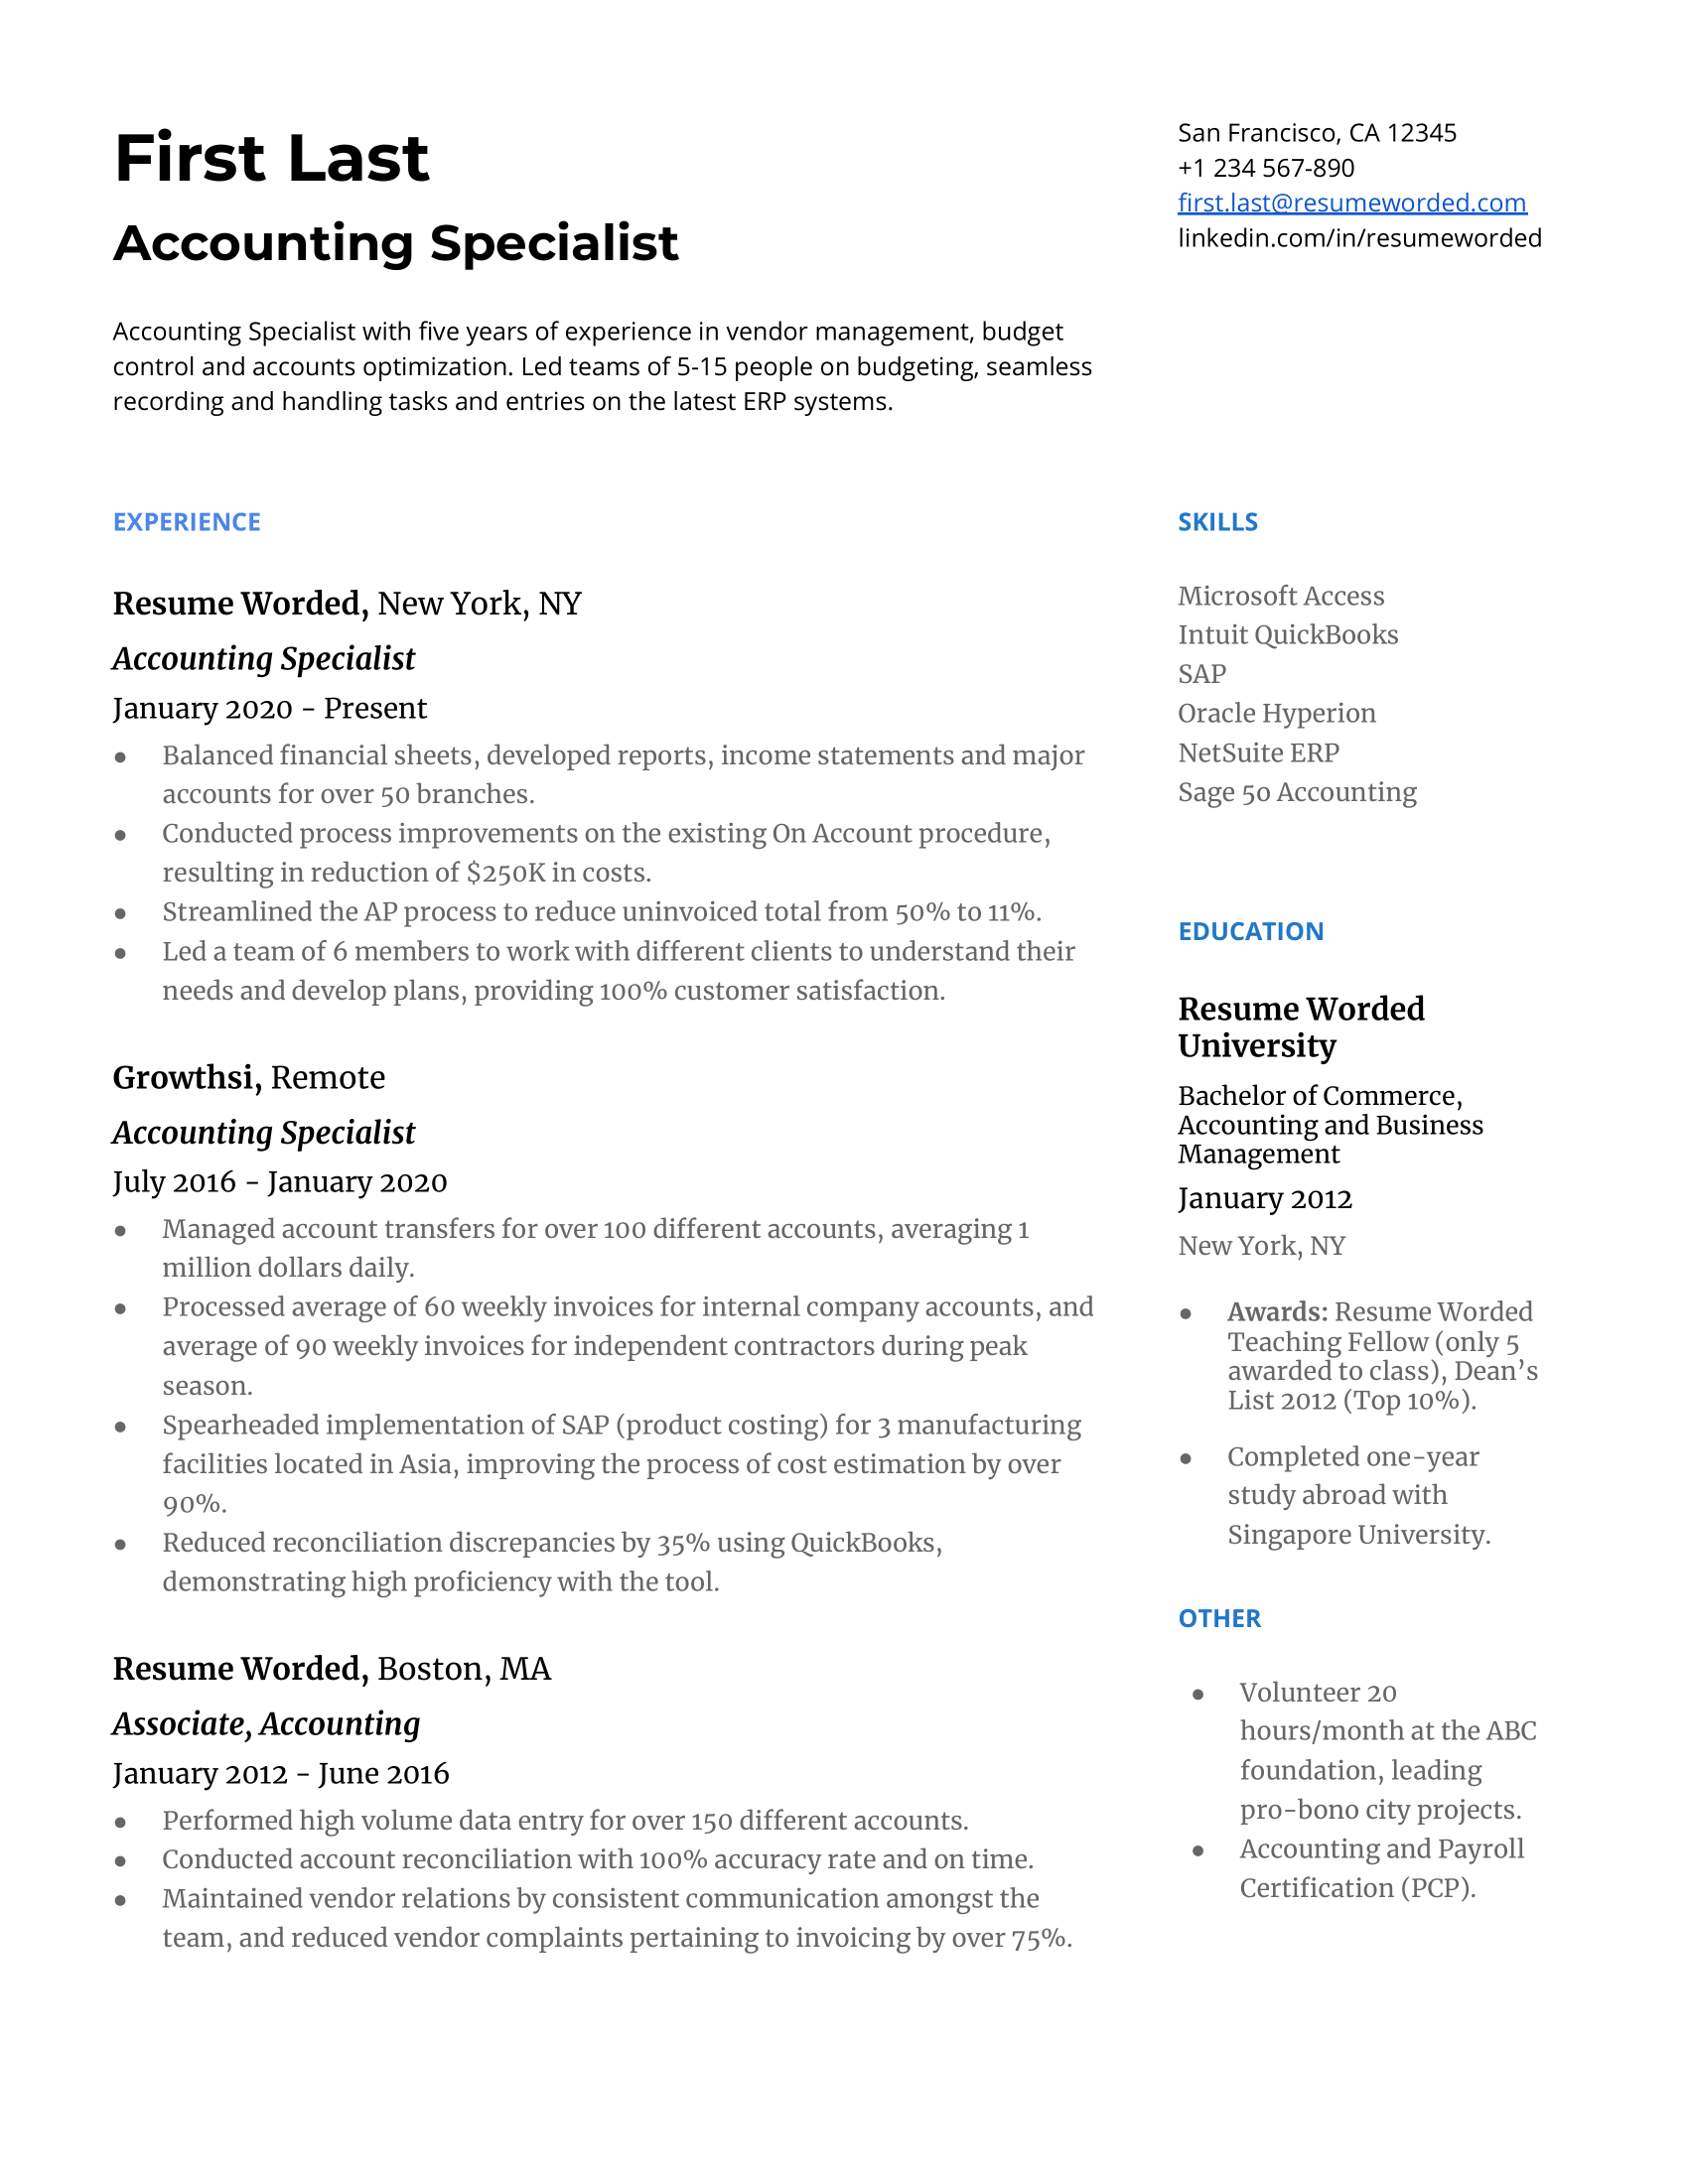 Accounting specialist resume with action verbs and technical skills section
